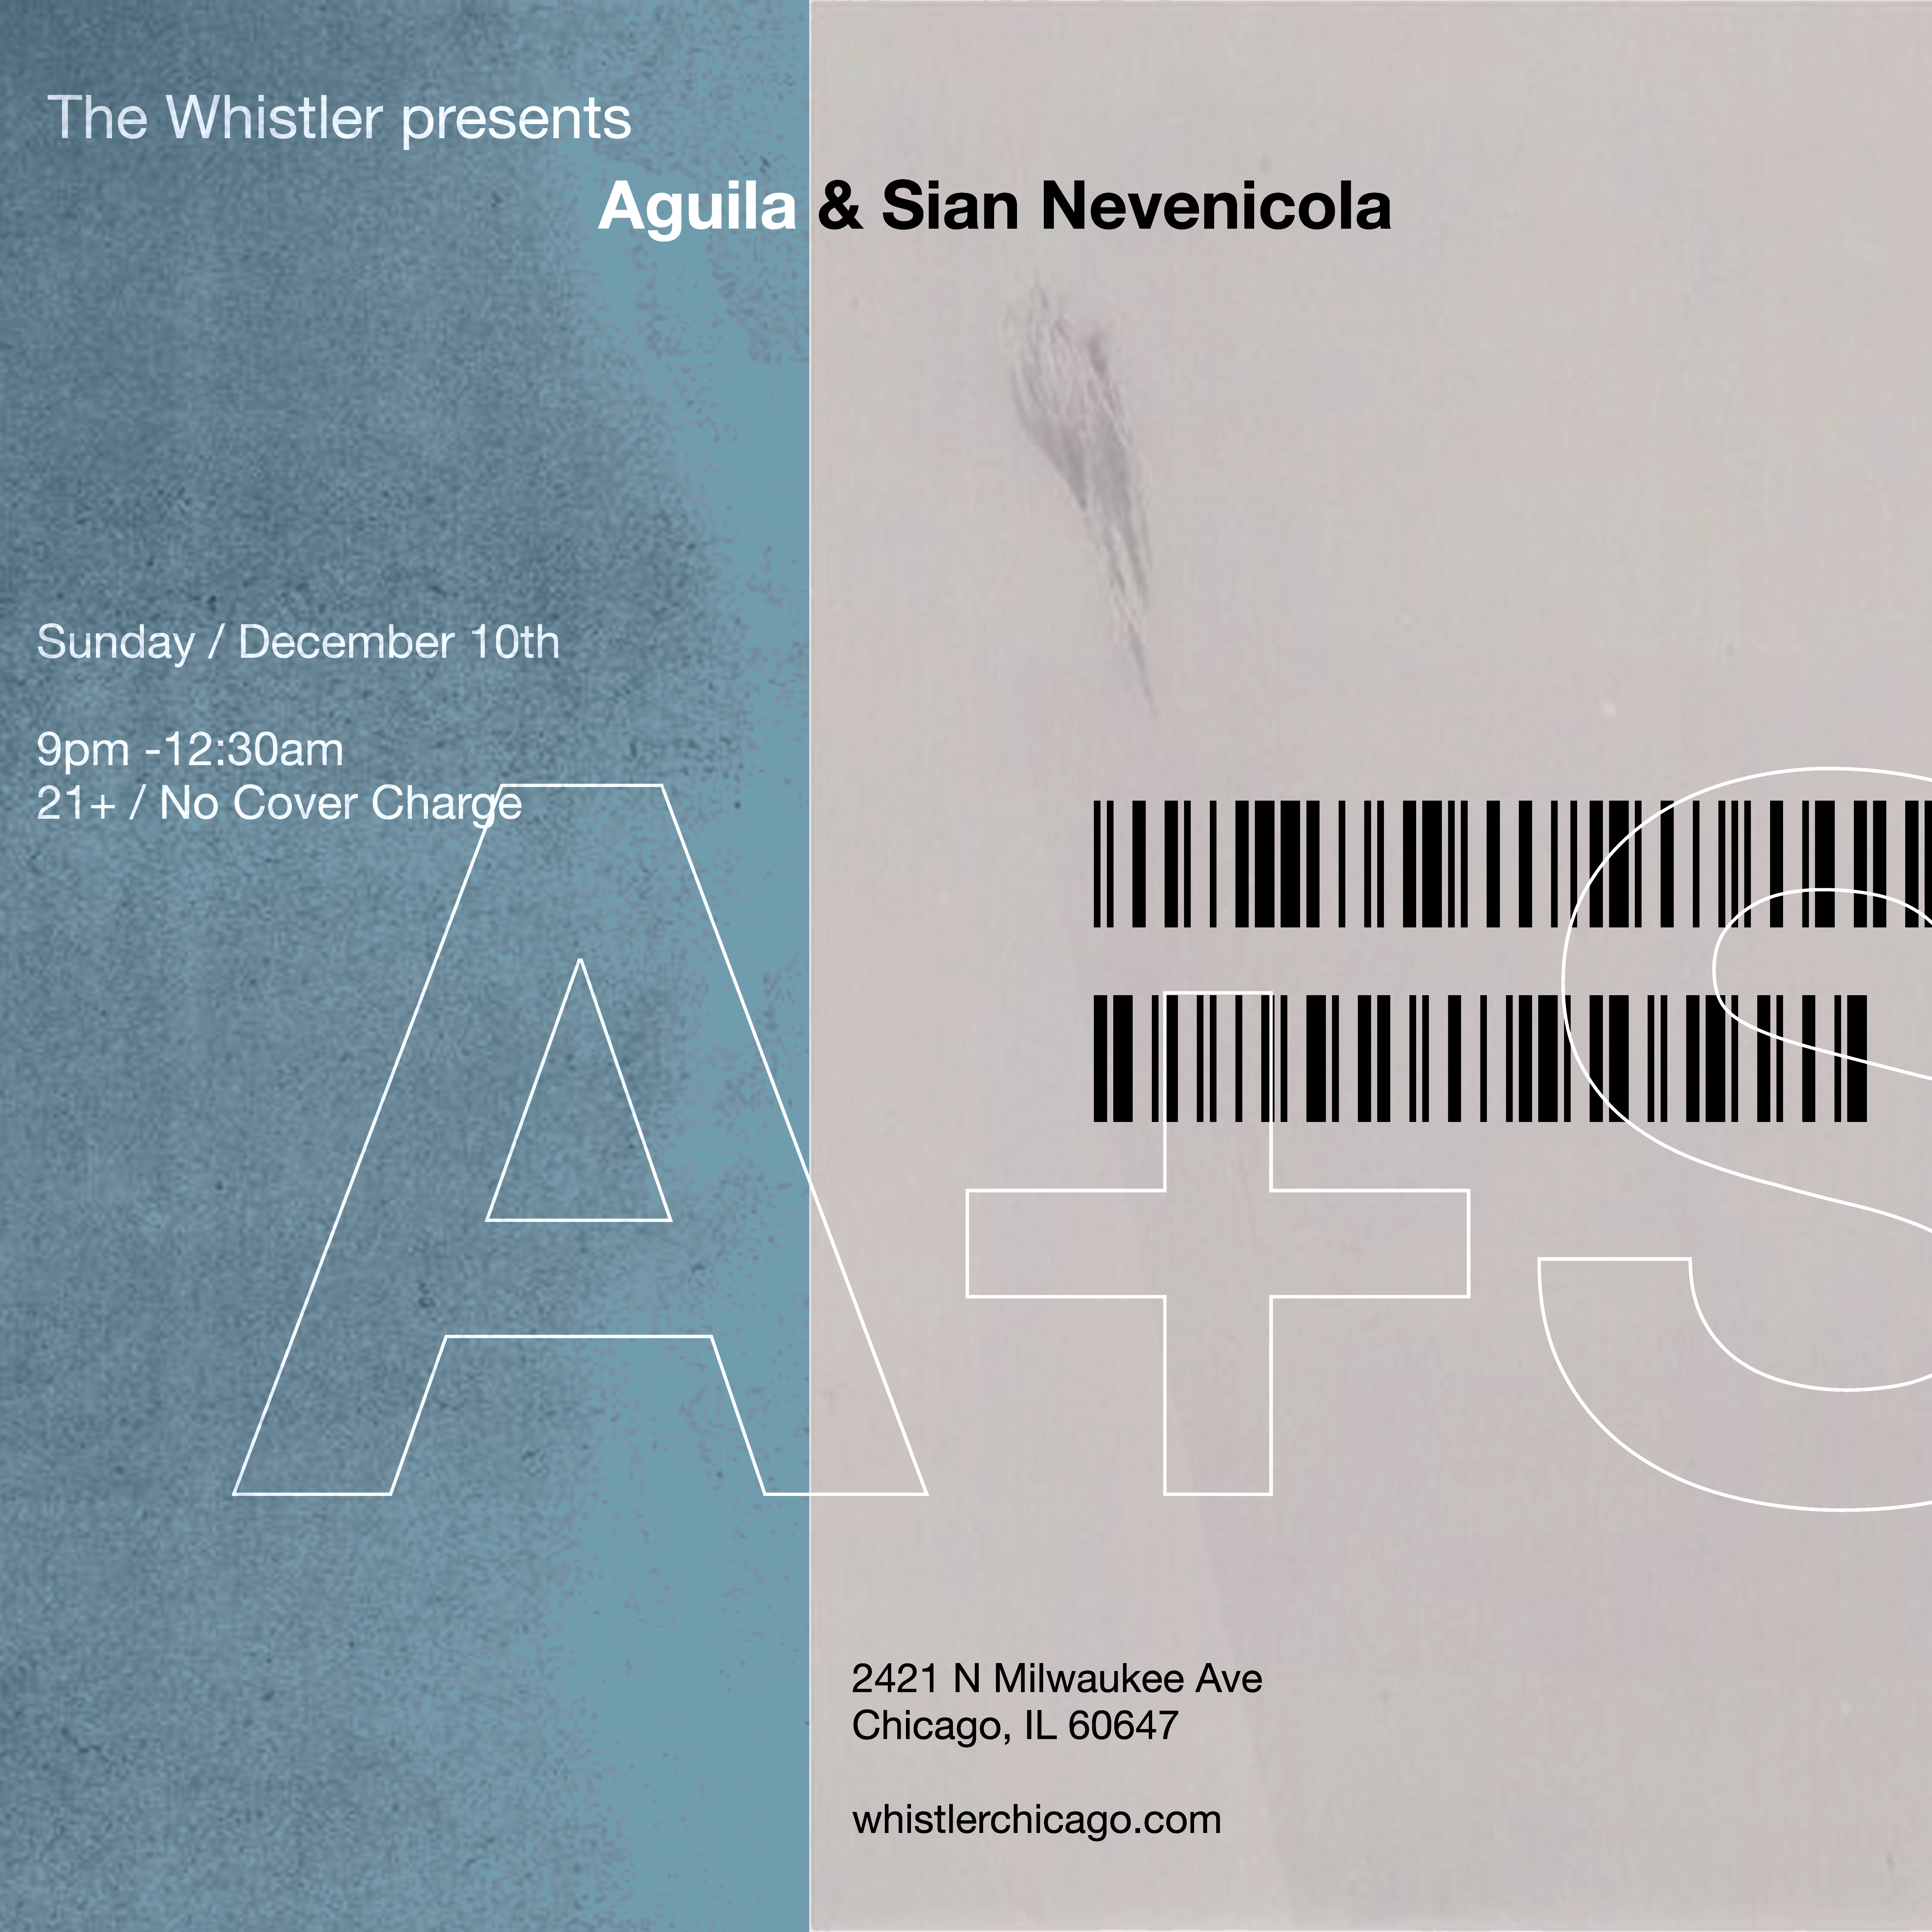 The Whistler presents: Aguila & Sian - フライヤー表